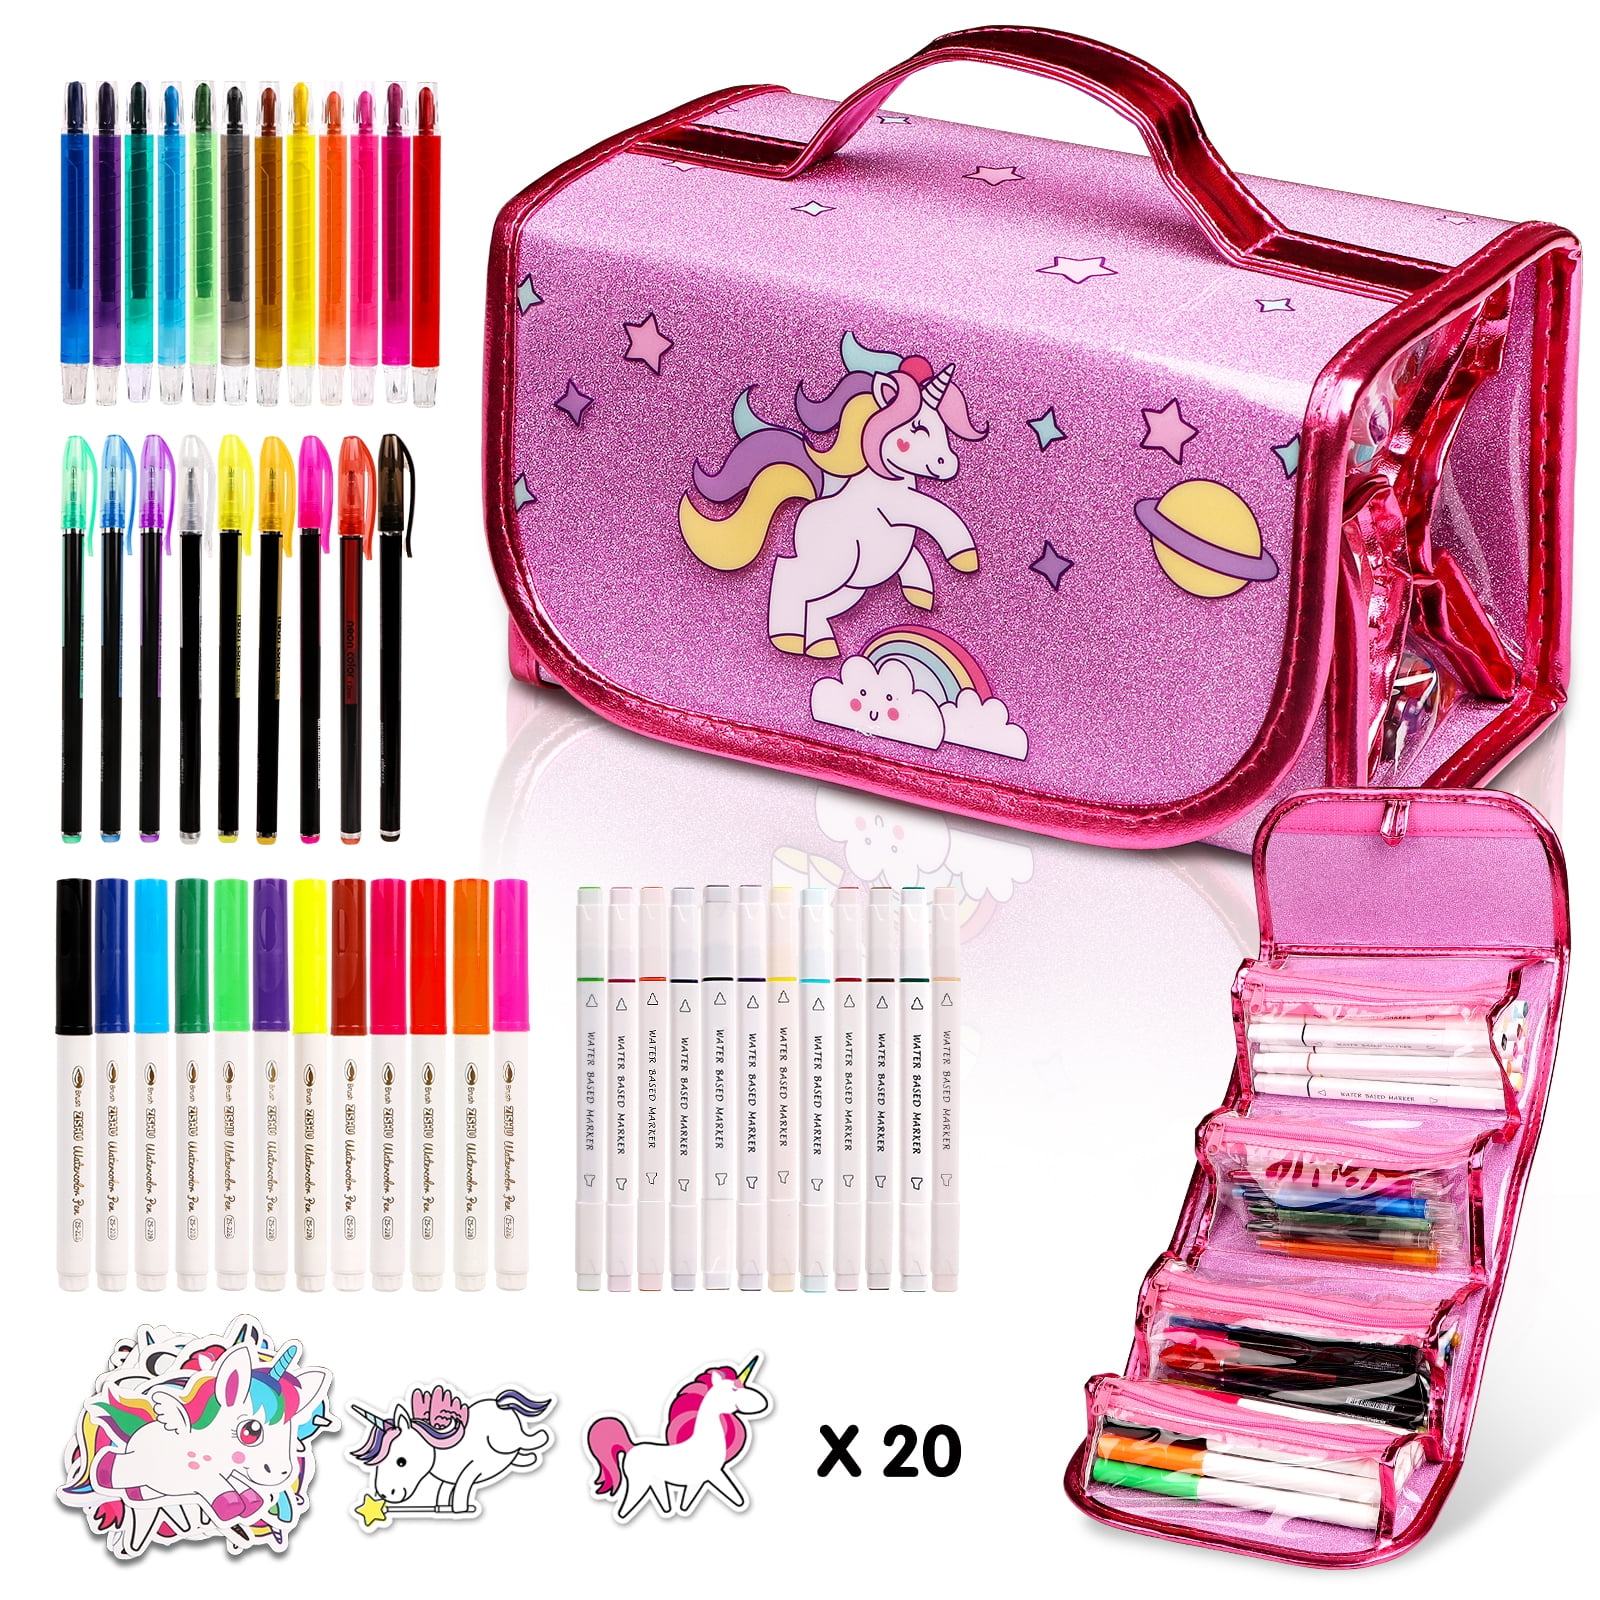 2 Set Fruit Scented Markers Set 98 Pcs Stationery with Unicorn Pencil Case,  Unicorn Gifts for Girls Ages 4-6-8, Assortment Marker Gel Pen Pencil Art